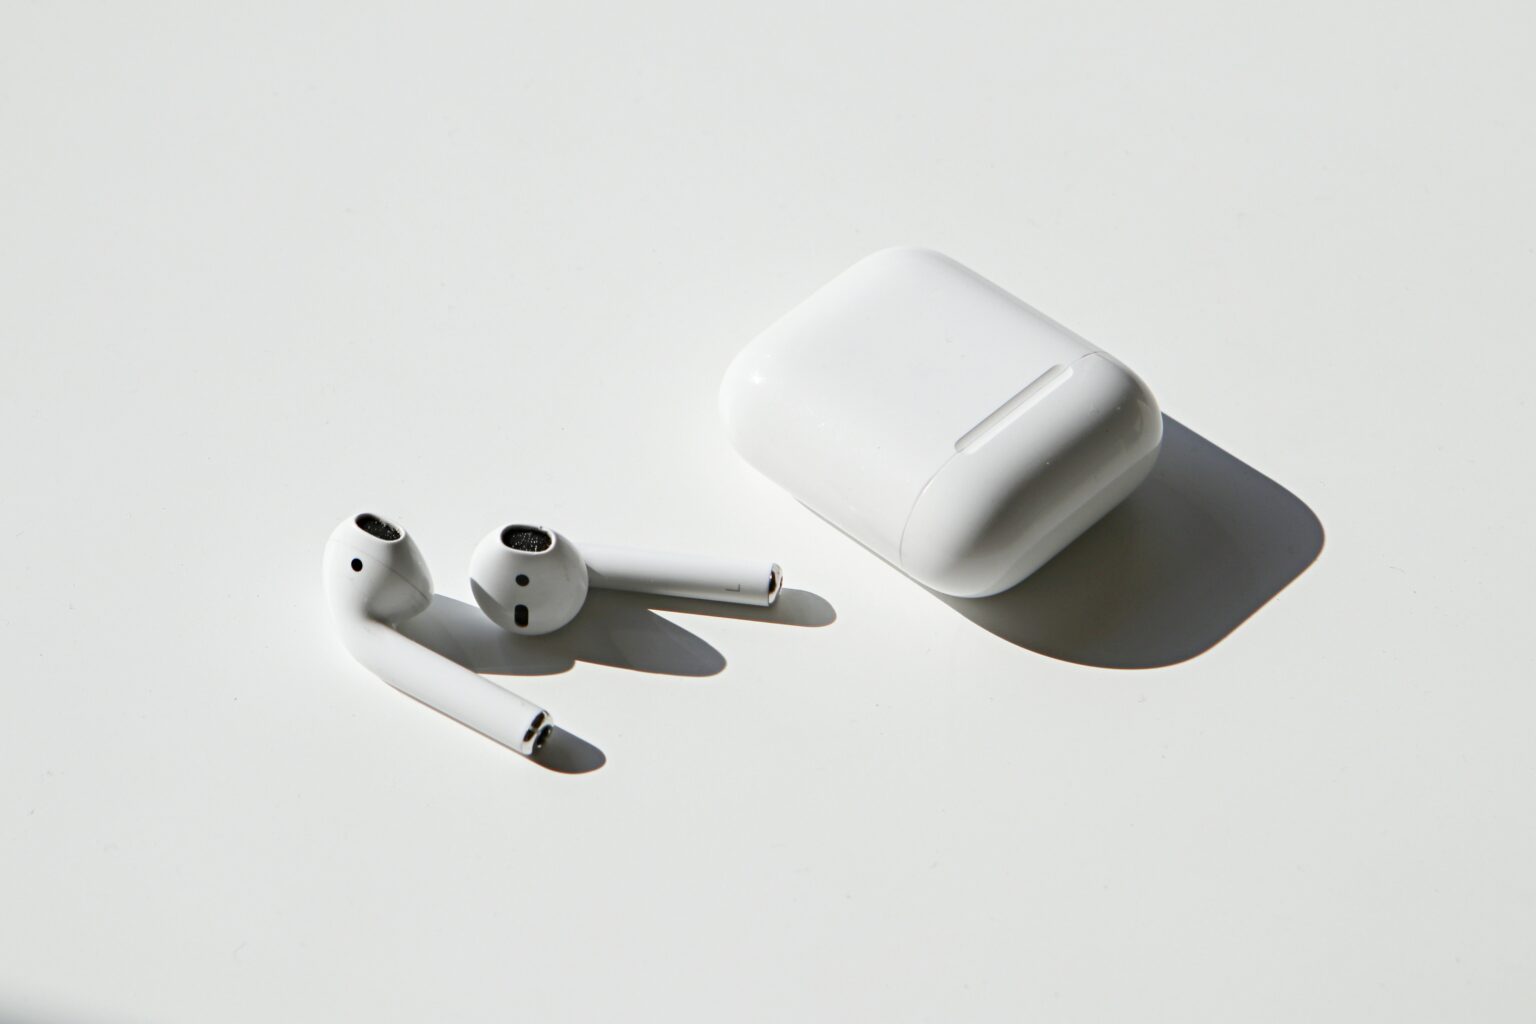 Today in Apple history: They looked weird at first, but now it's impossible to remember a world without AirPods.